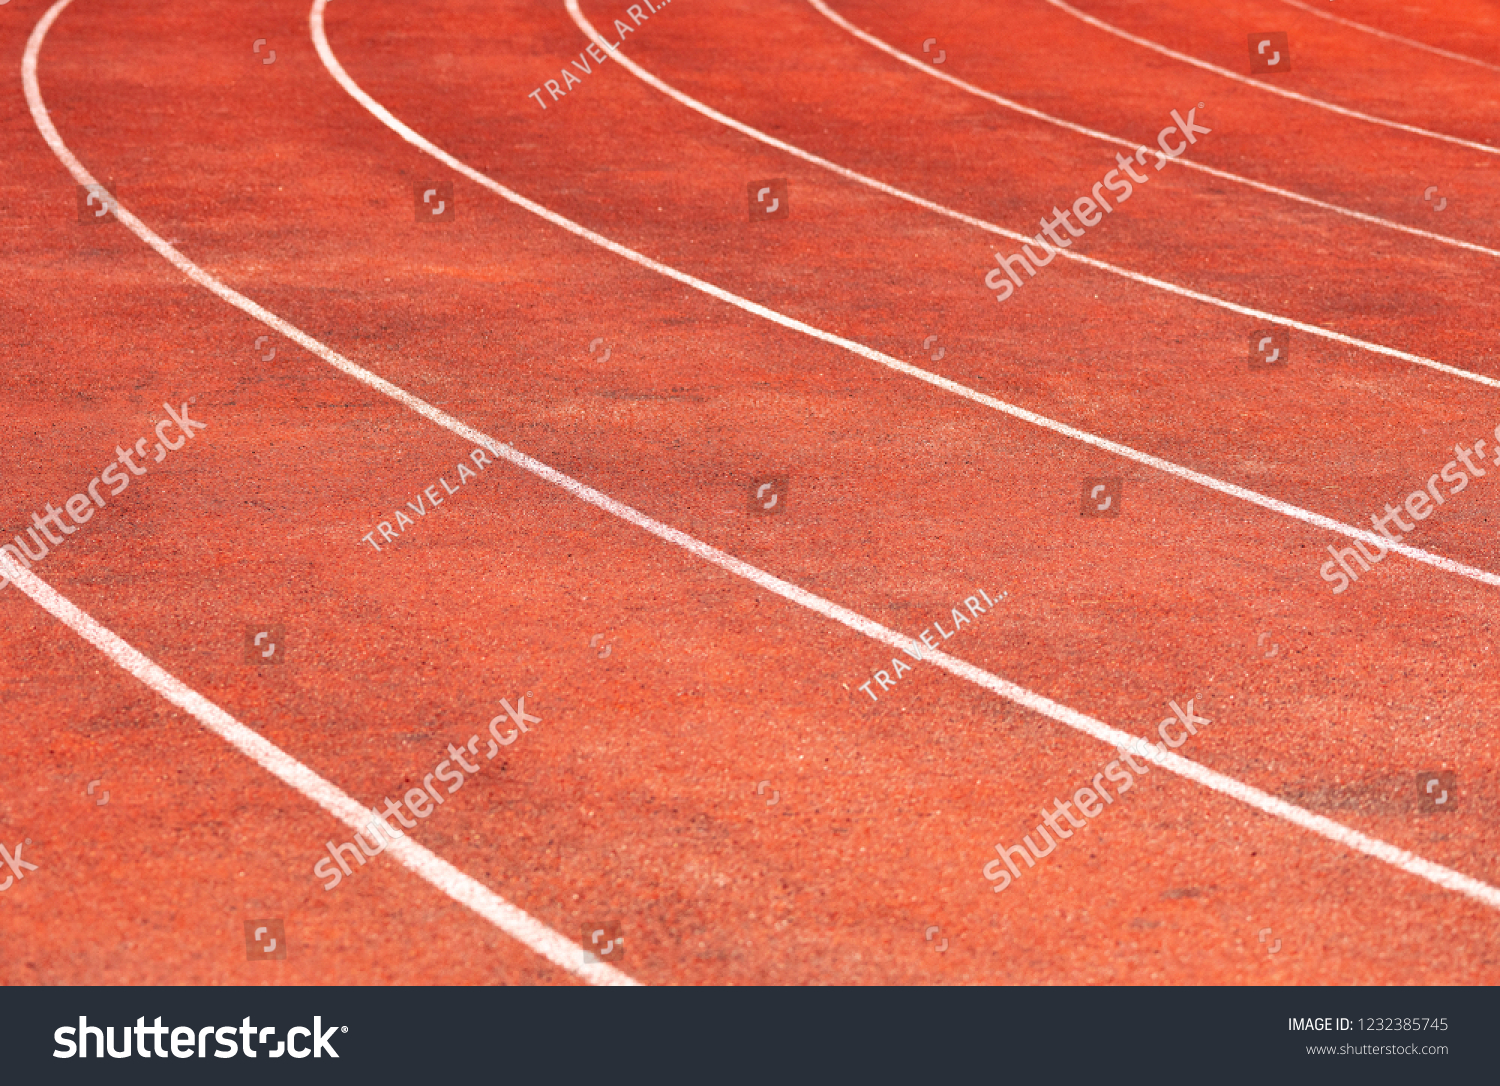 Stadium track for running and athletics competitions. New synthetic rubber treadmill. Empty racetrack. #1232385745